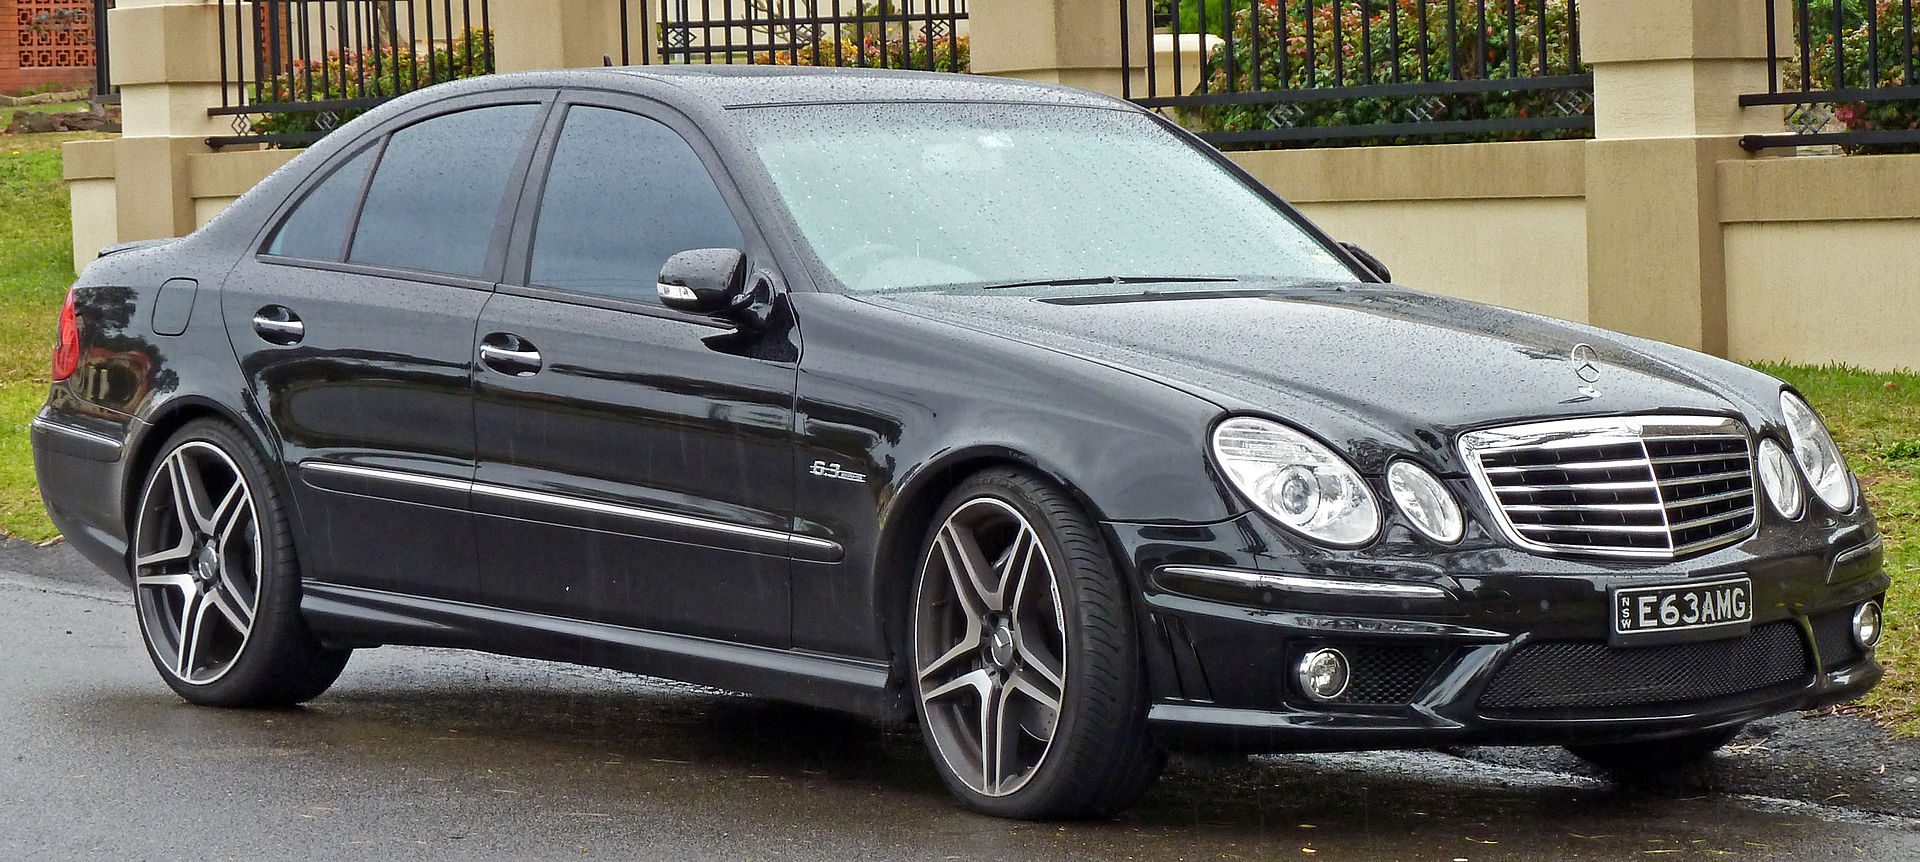 Put the links online shopping tuning W211 E6.3 AMG  ( body